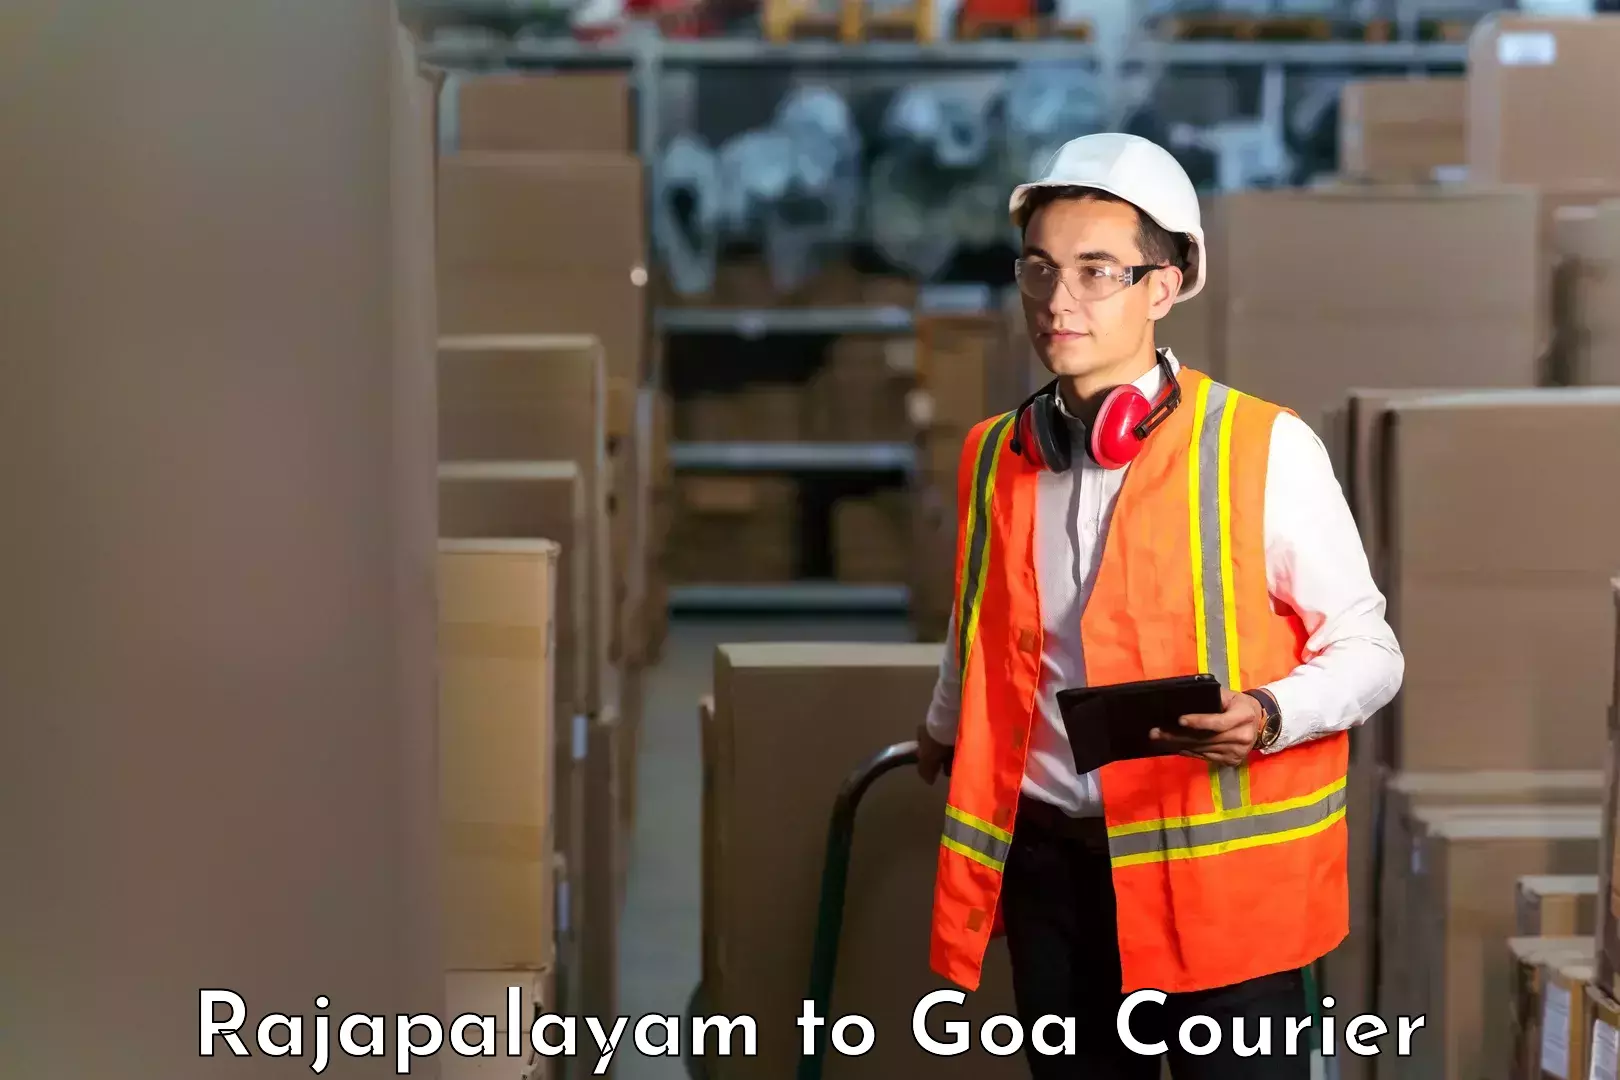 Courier service comparison Rajapalayam to NIT Goa